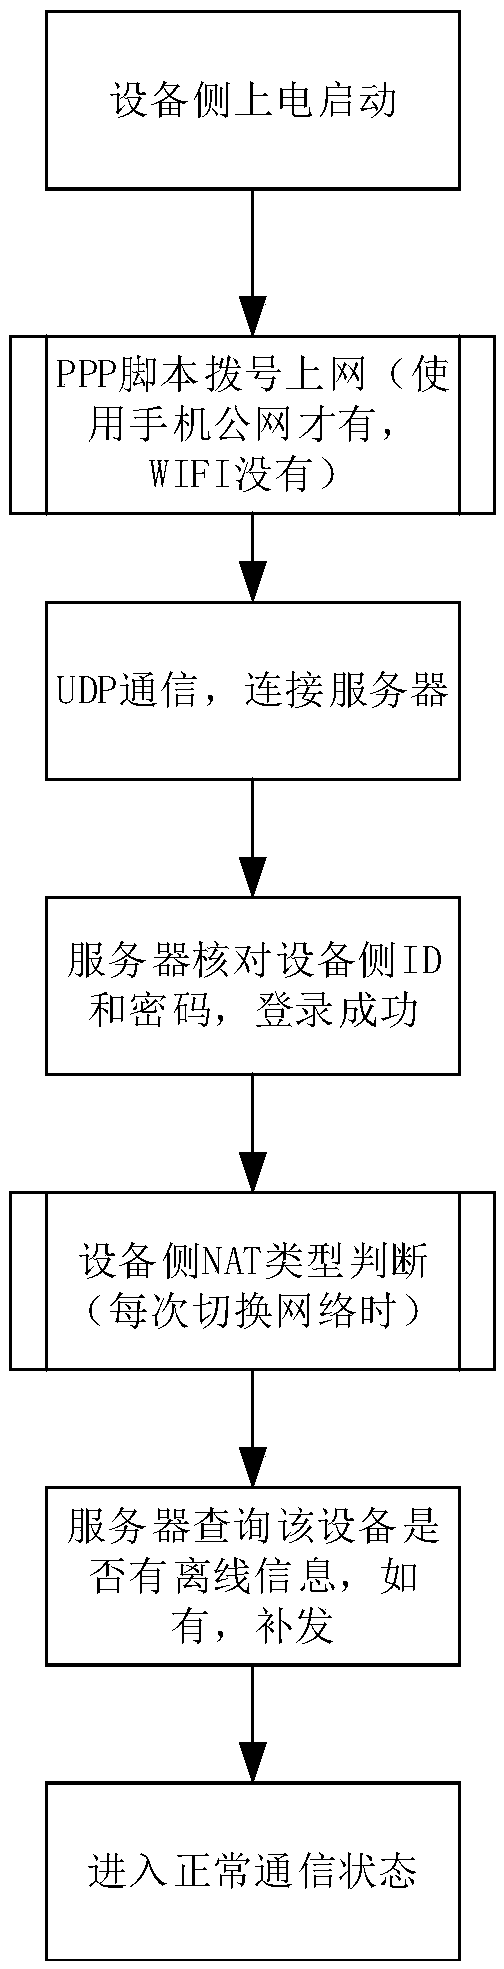 Remote monitoring calling method and system